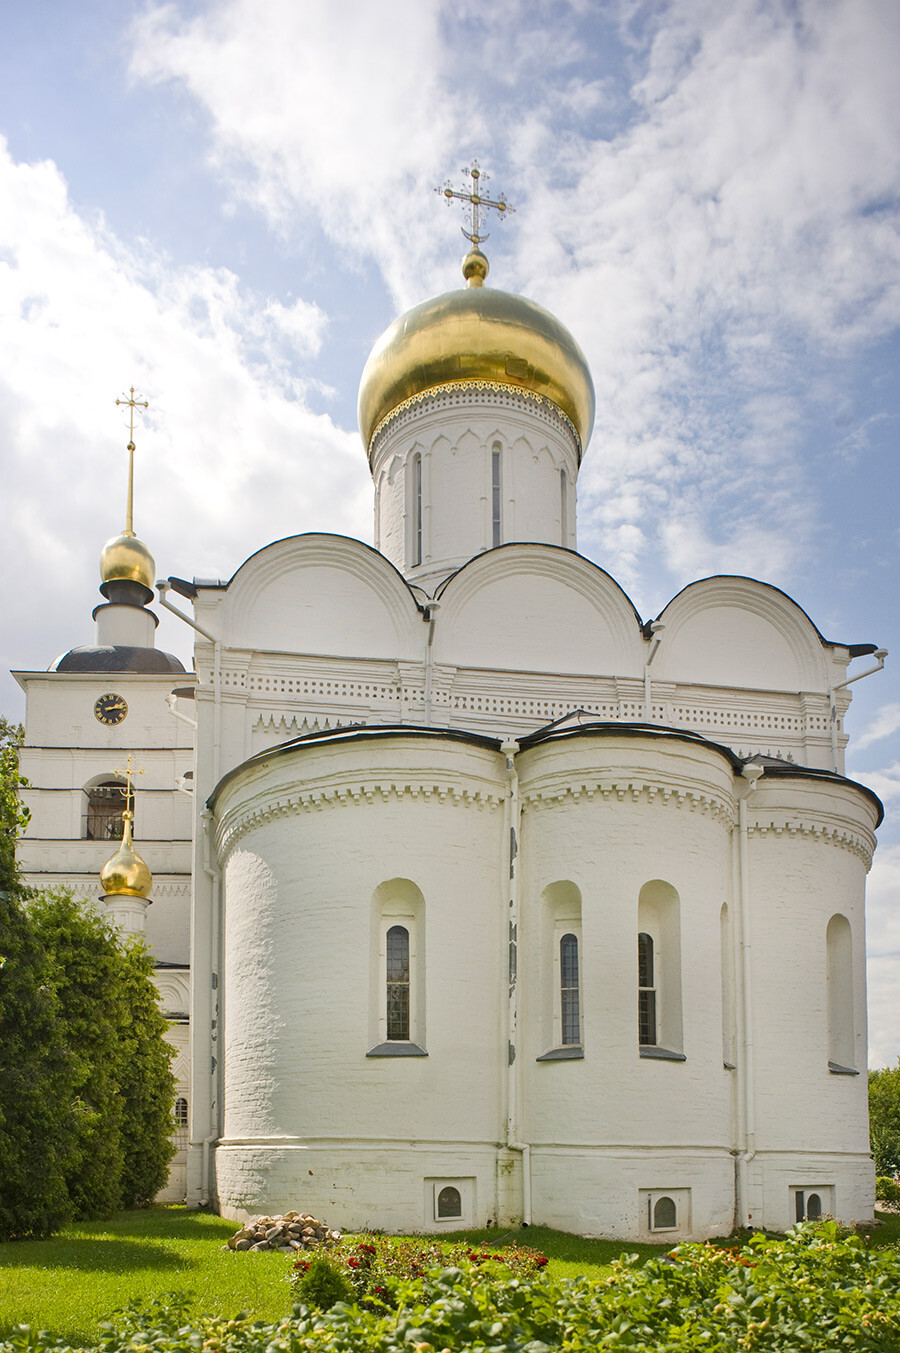 Monastery of Sts. Boris & Gleb, Cathedral of Sts. Boris & Gleb. East view. July 18, 2015